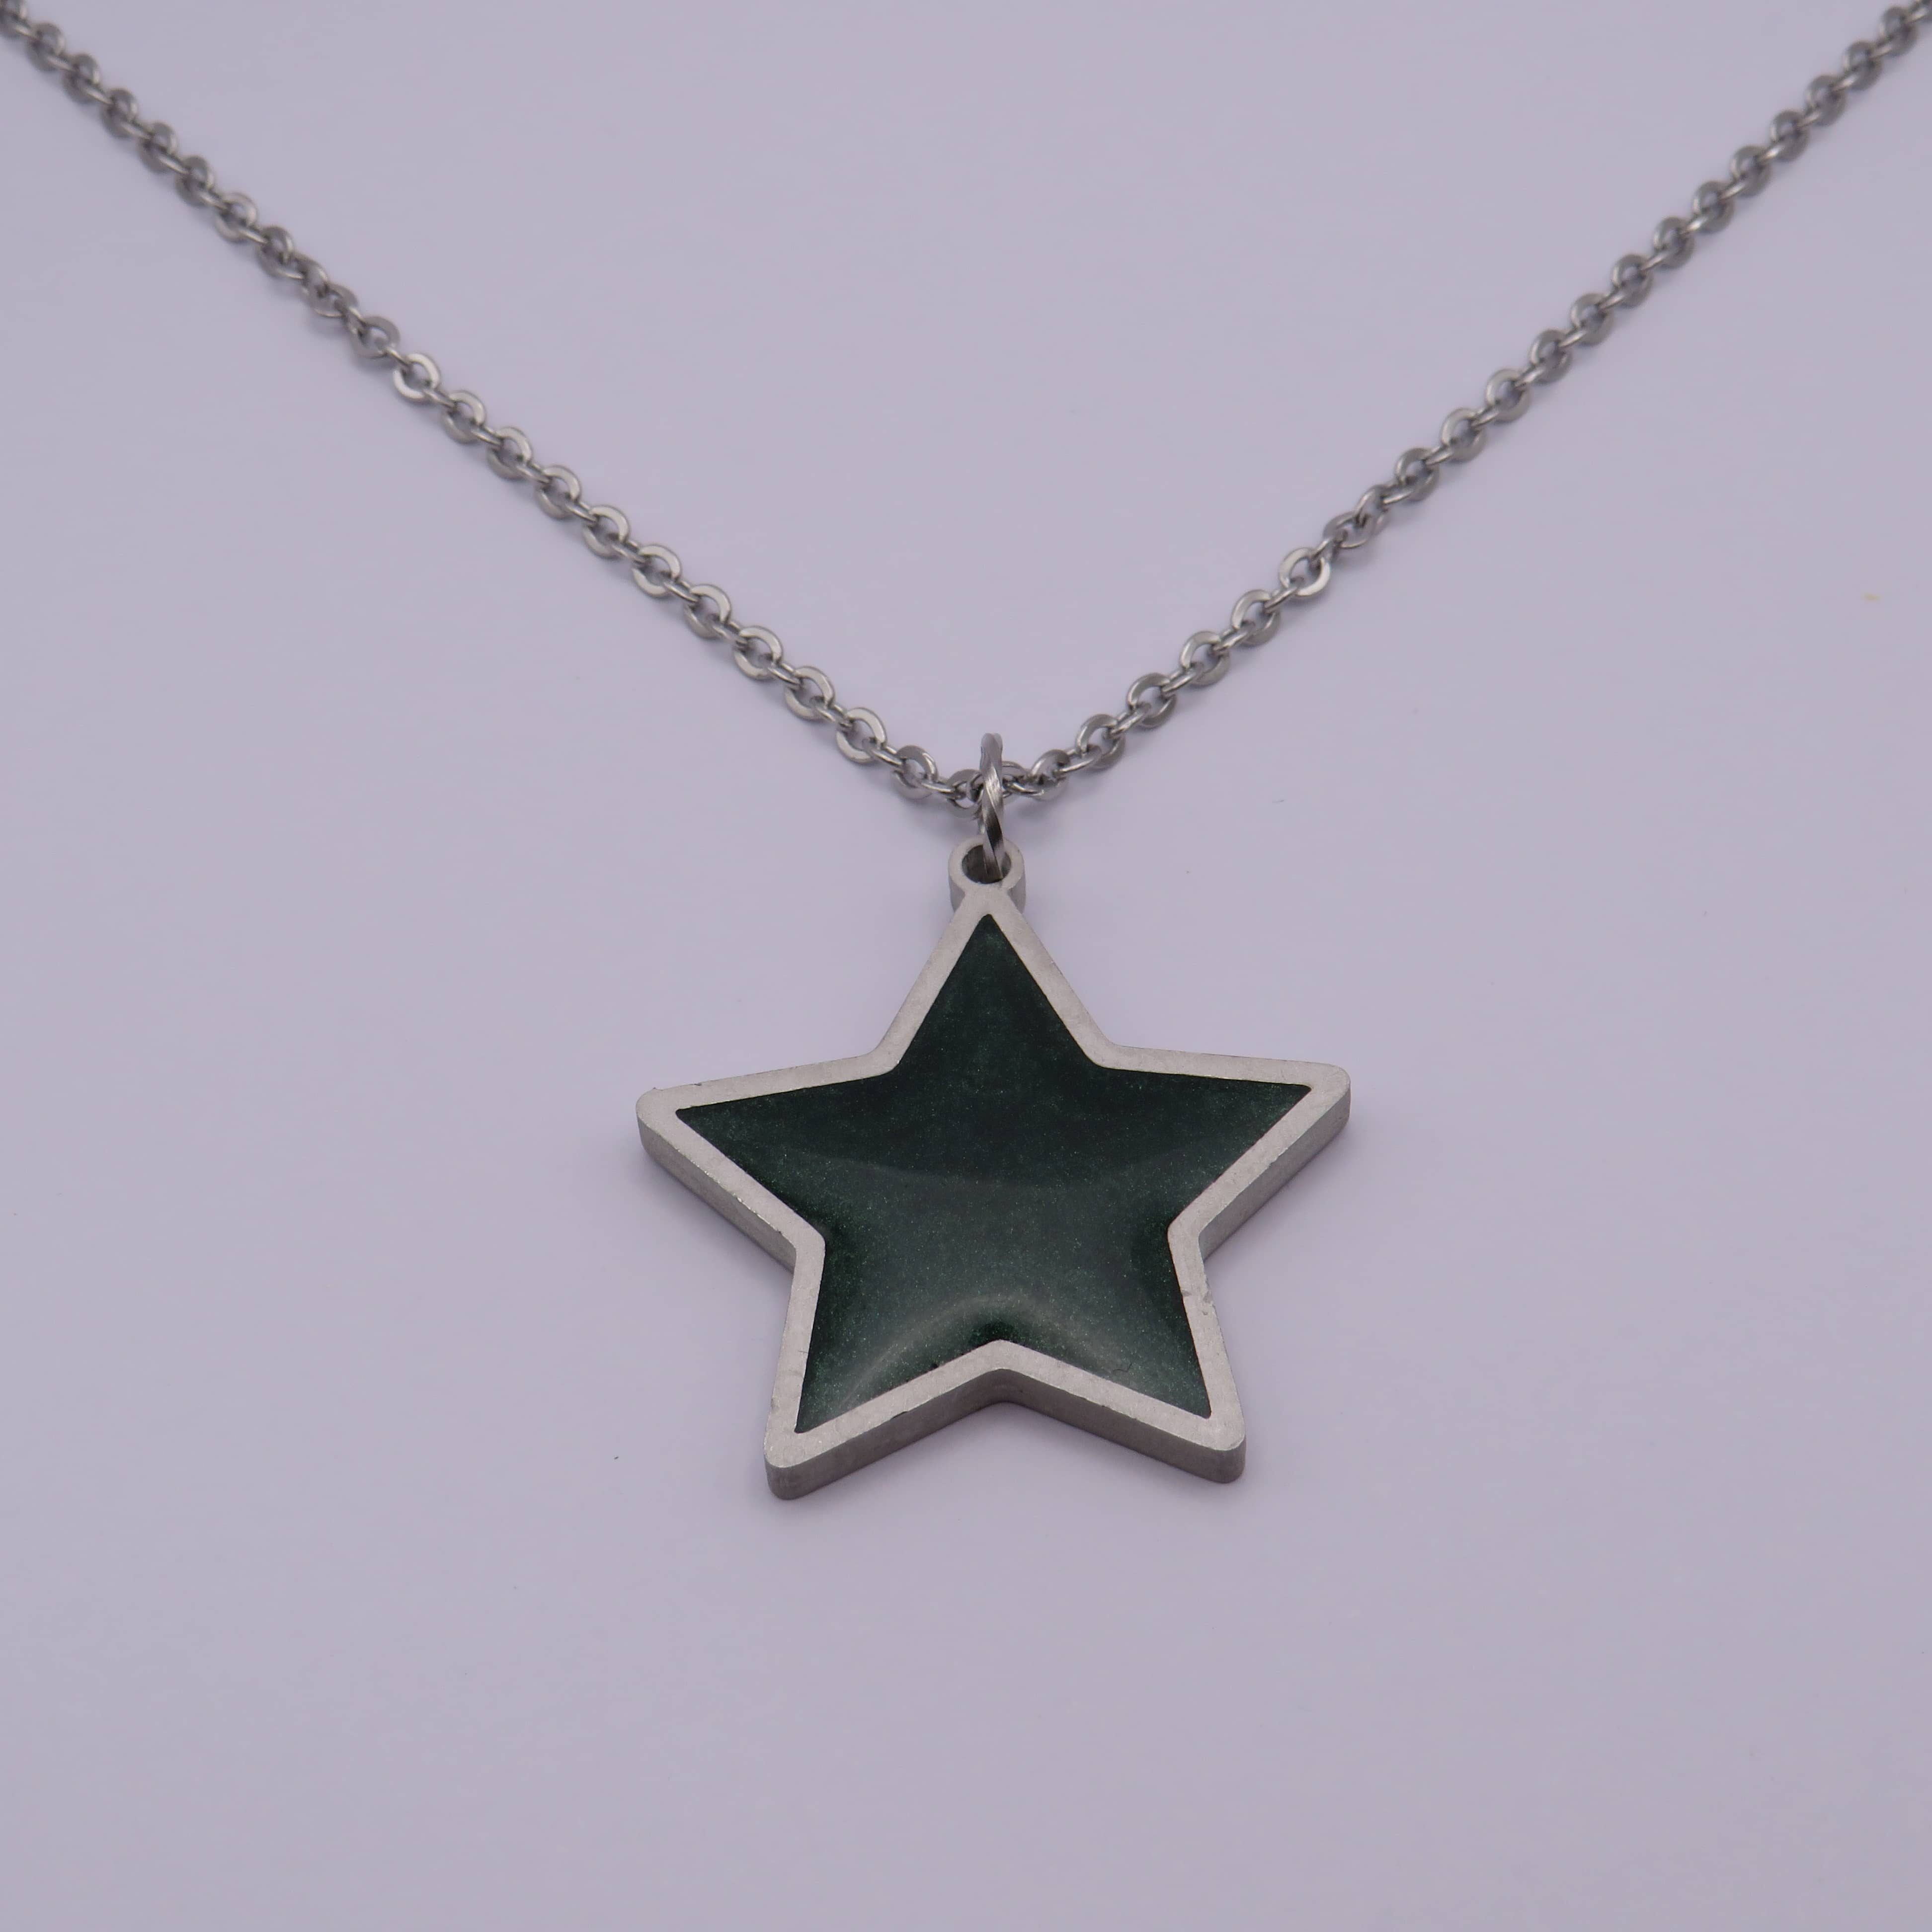 Stainless Steel Green Star Pendant Necklace